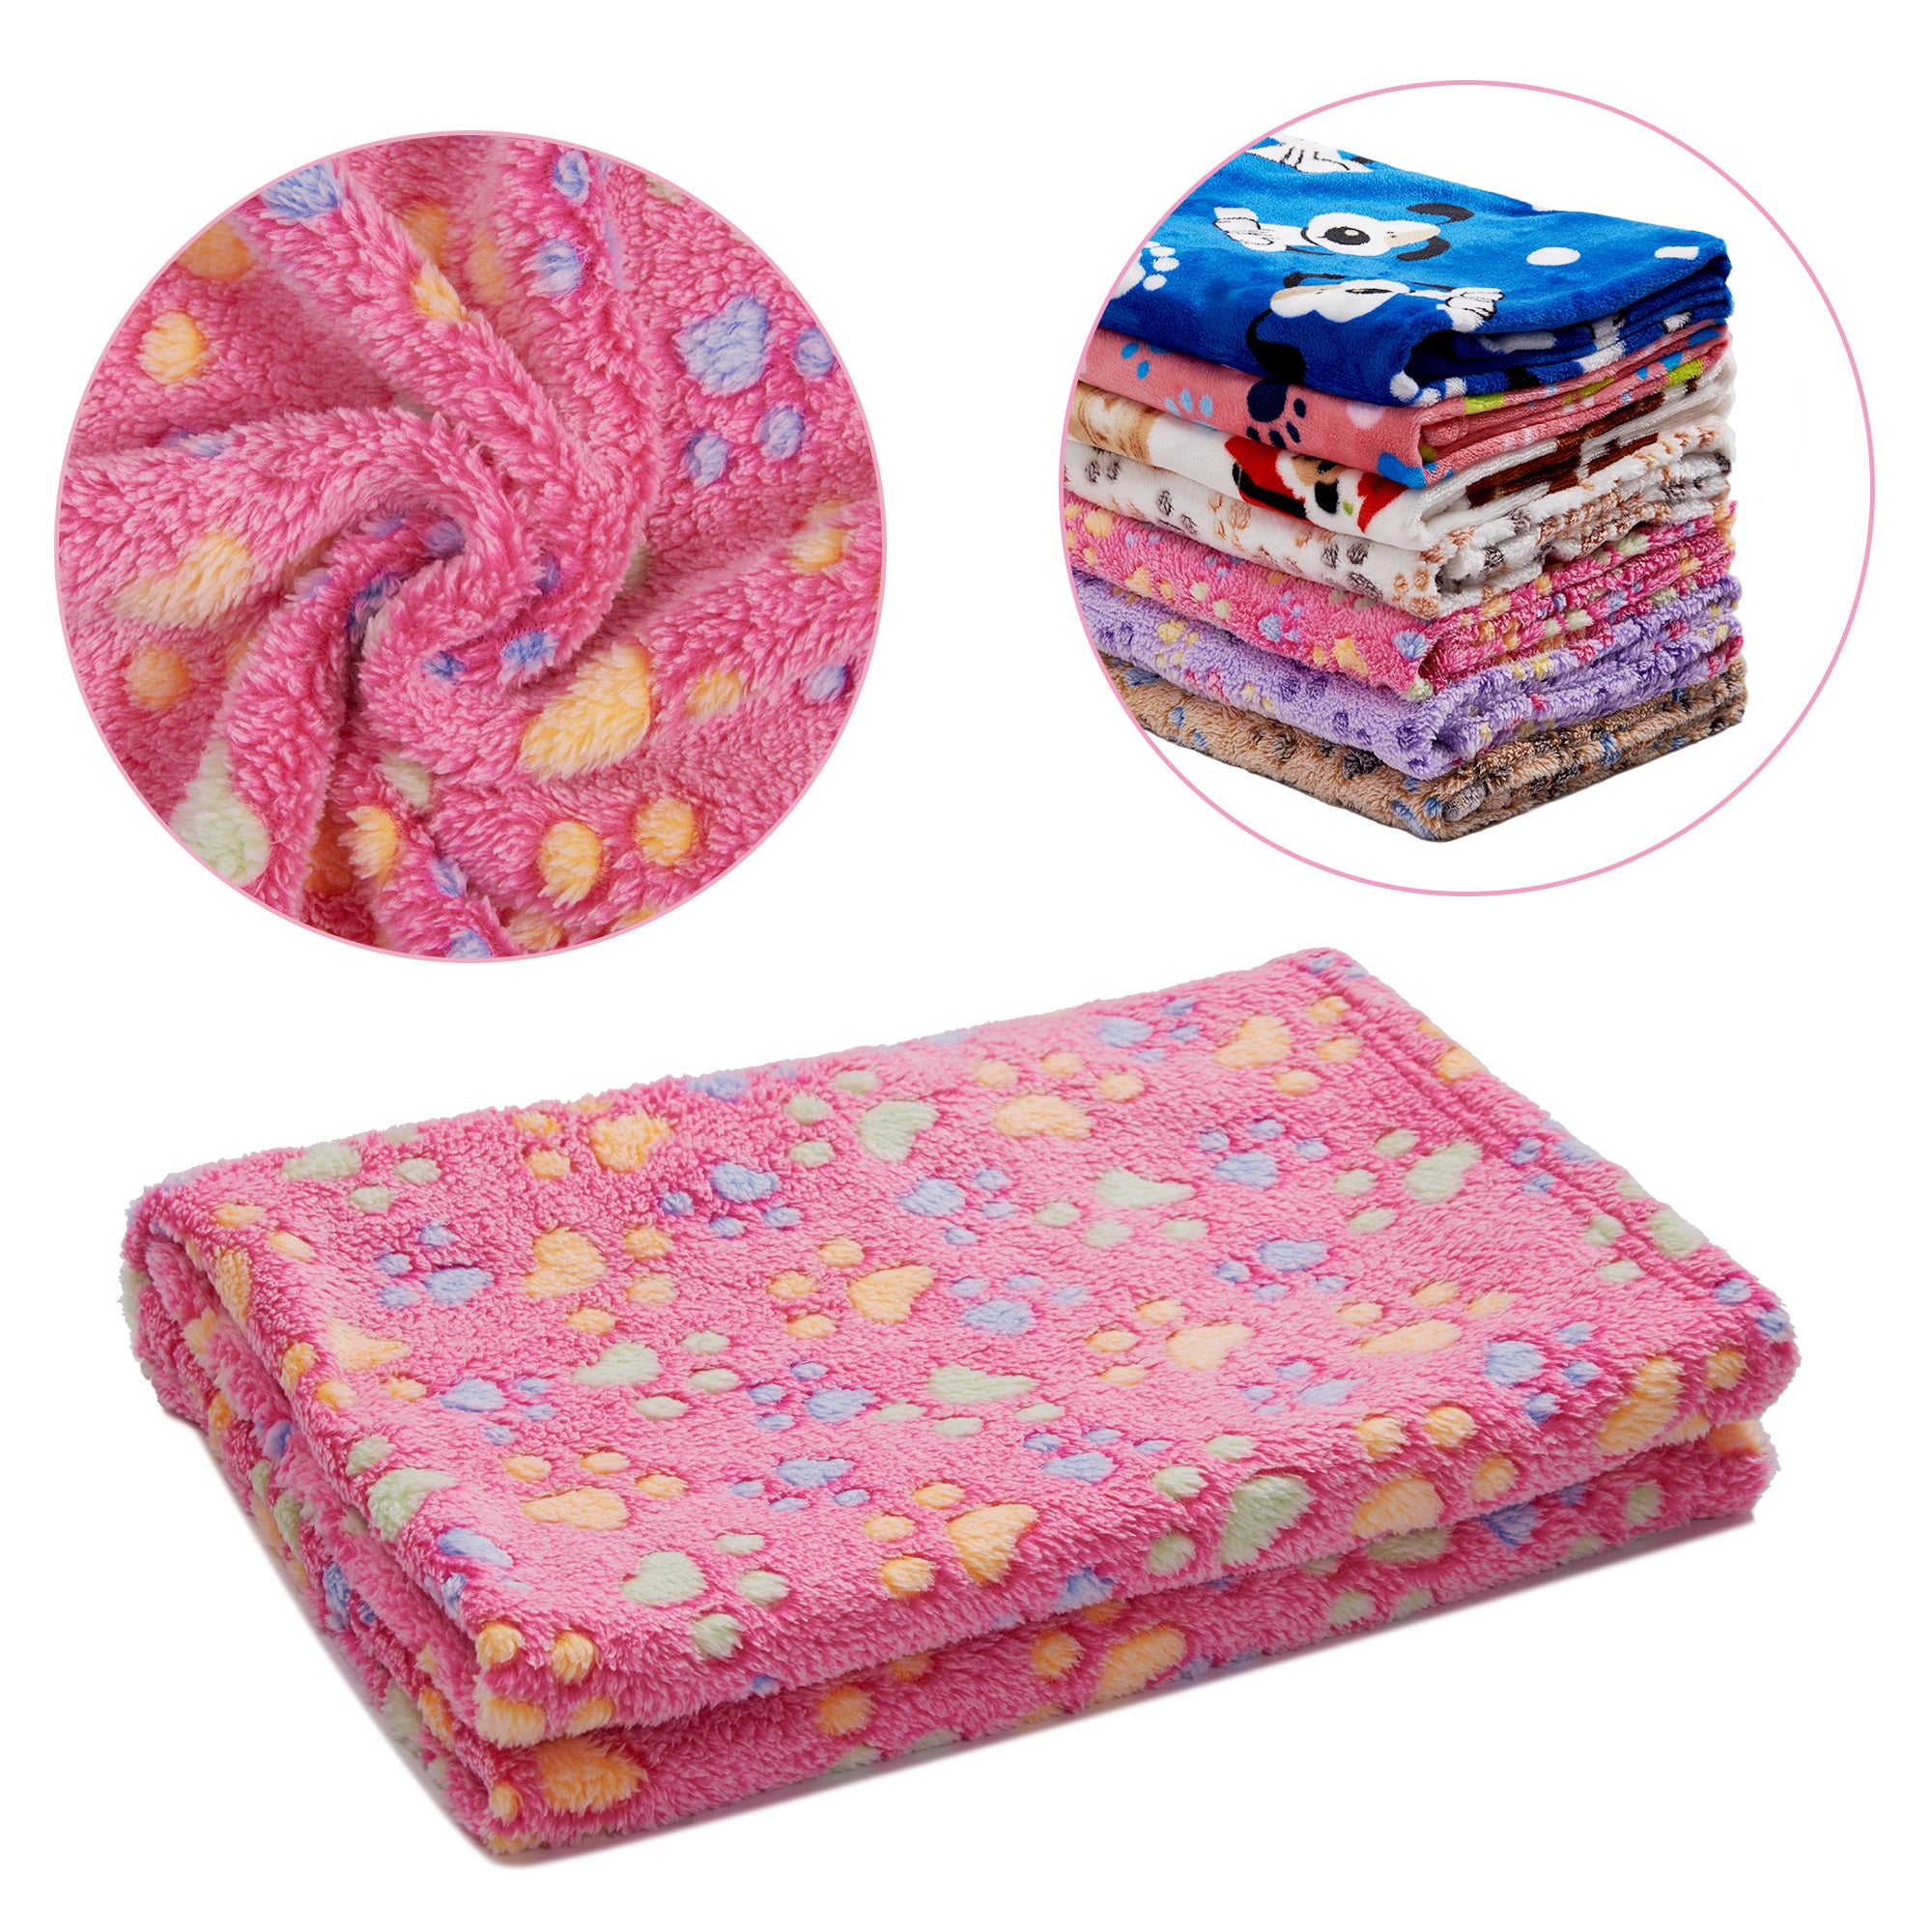 Puppy Sleeping Small Cats Bed Doggy Soft Warming Fleece Pet Dogs Blanket 104*76cm Pink #2